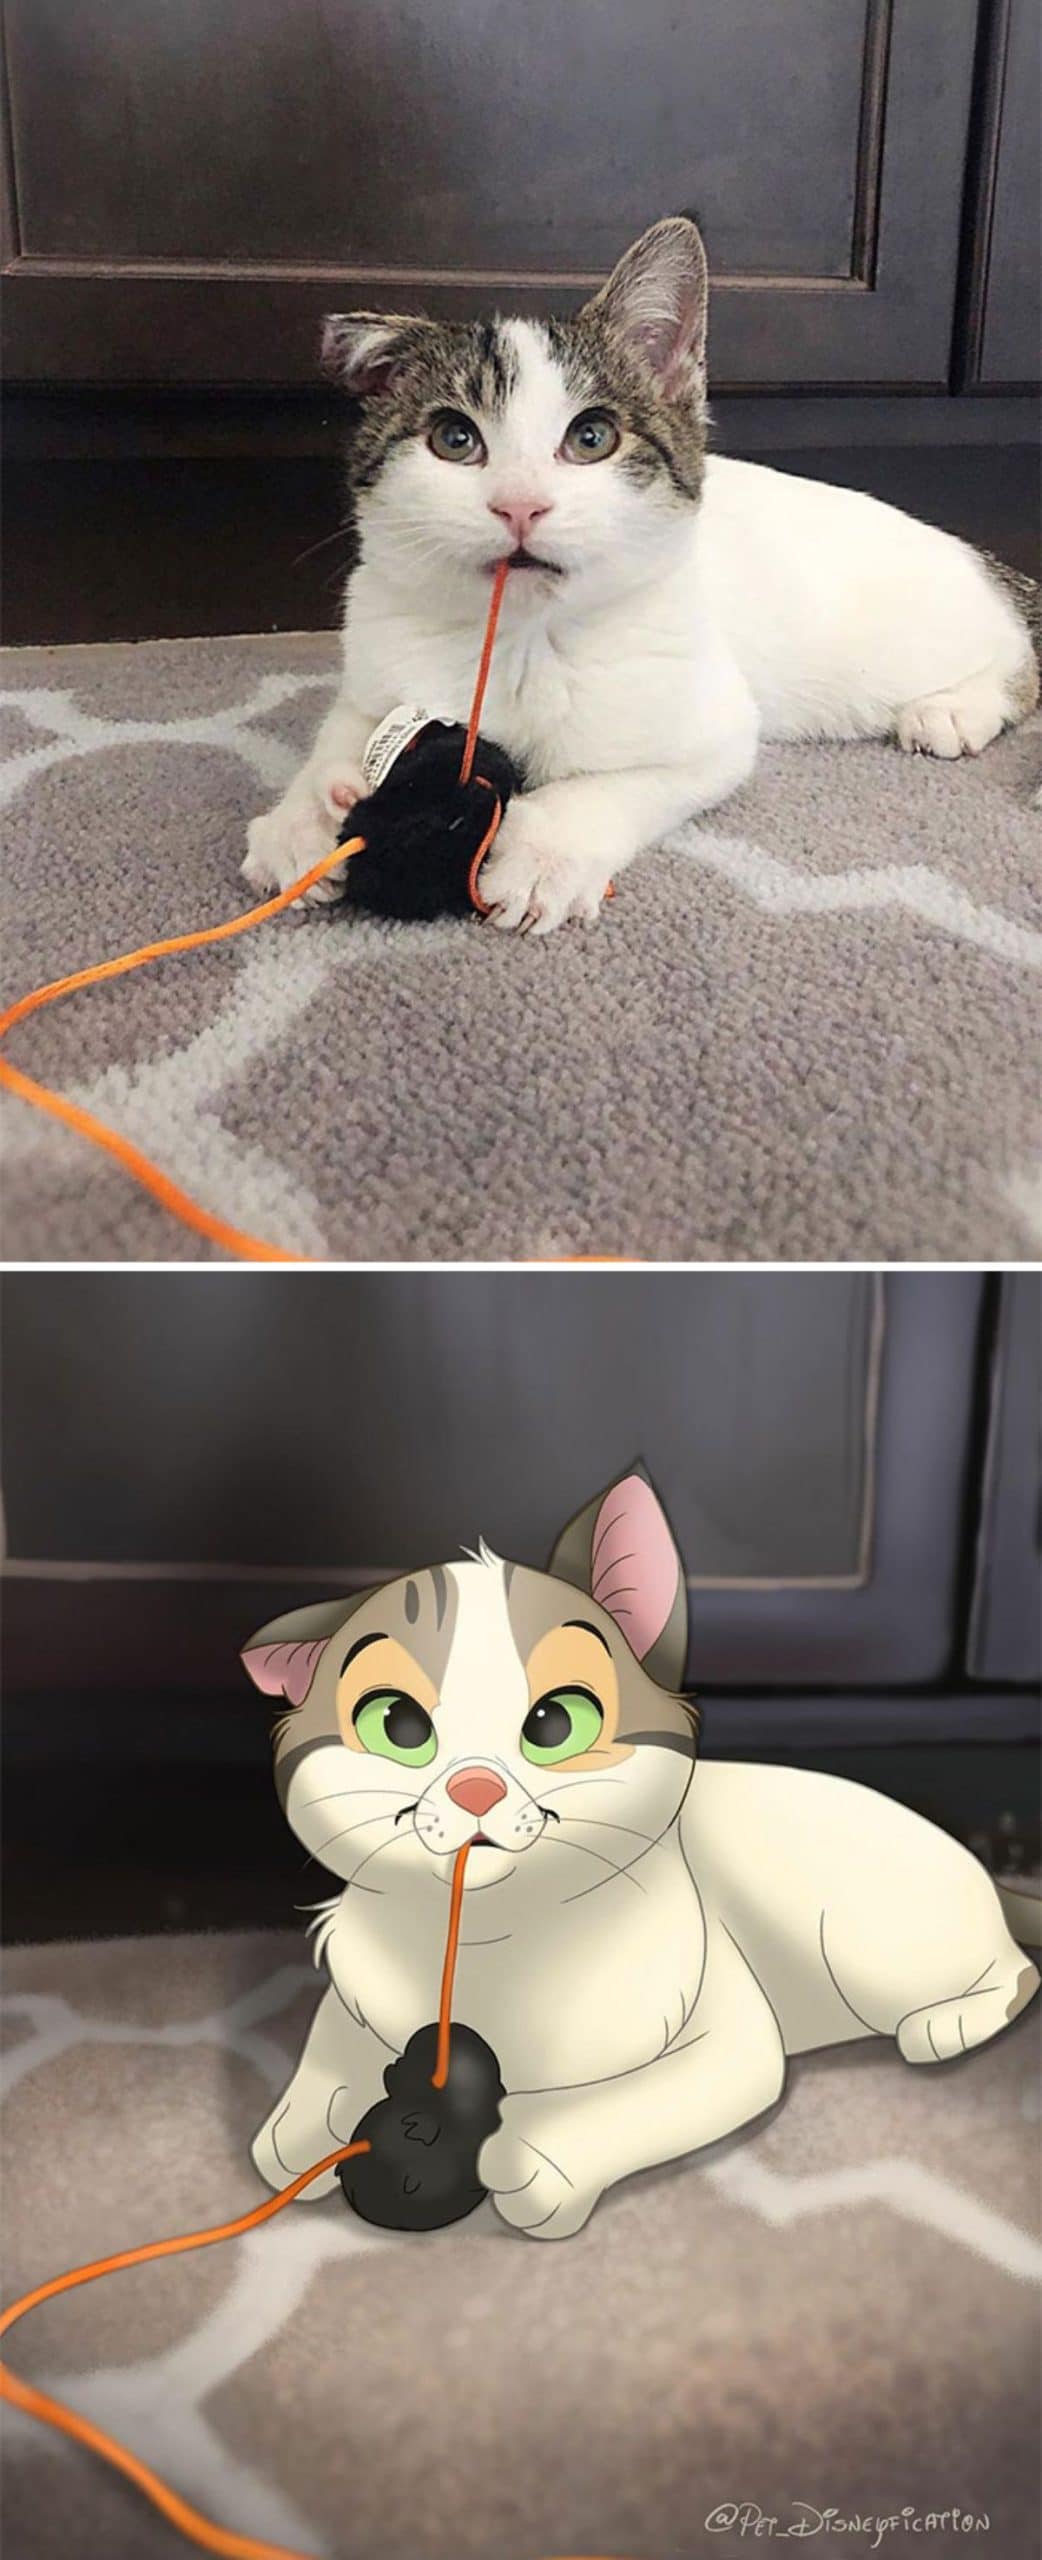 real photo and cartoon image of a white and grey cat laying on a carpet with orange string from a black and orange toy in its mouth